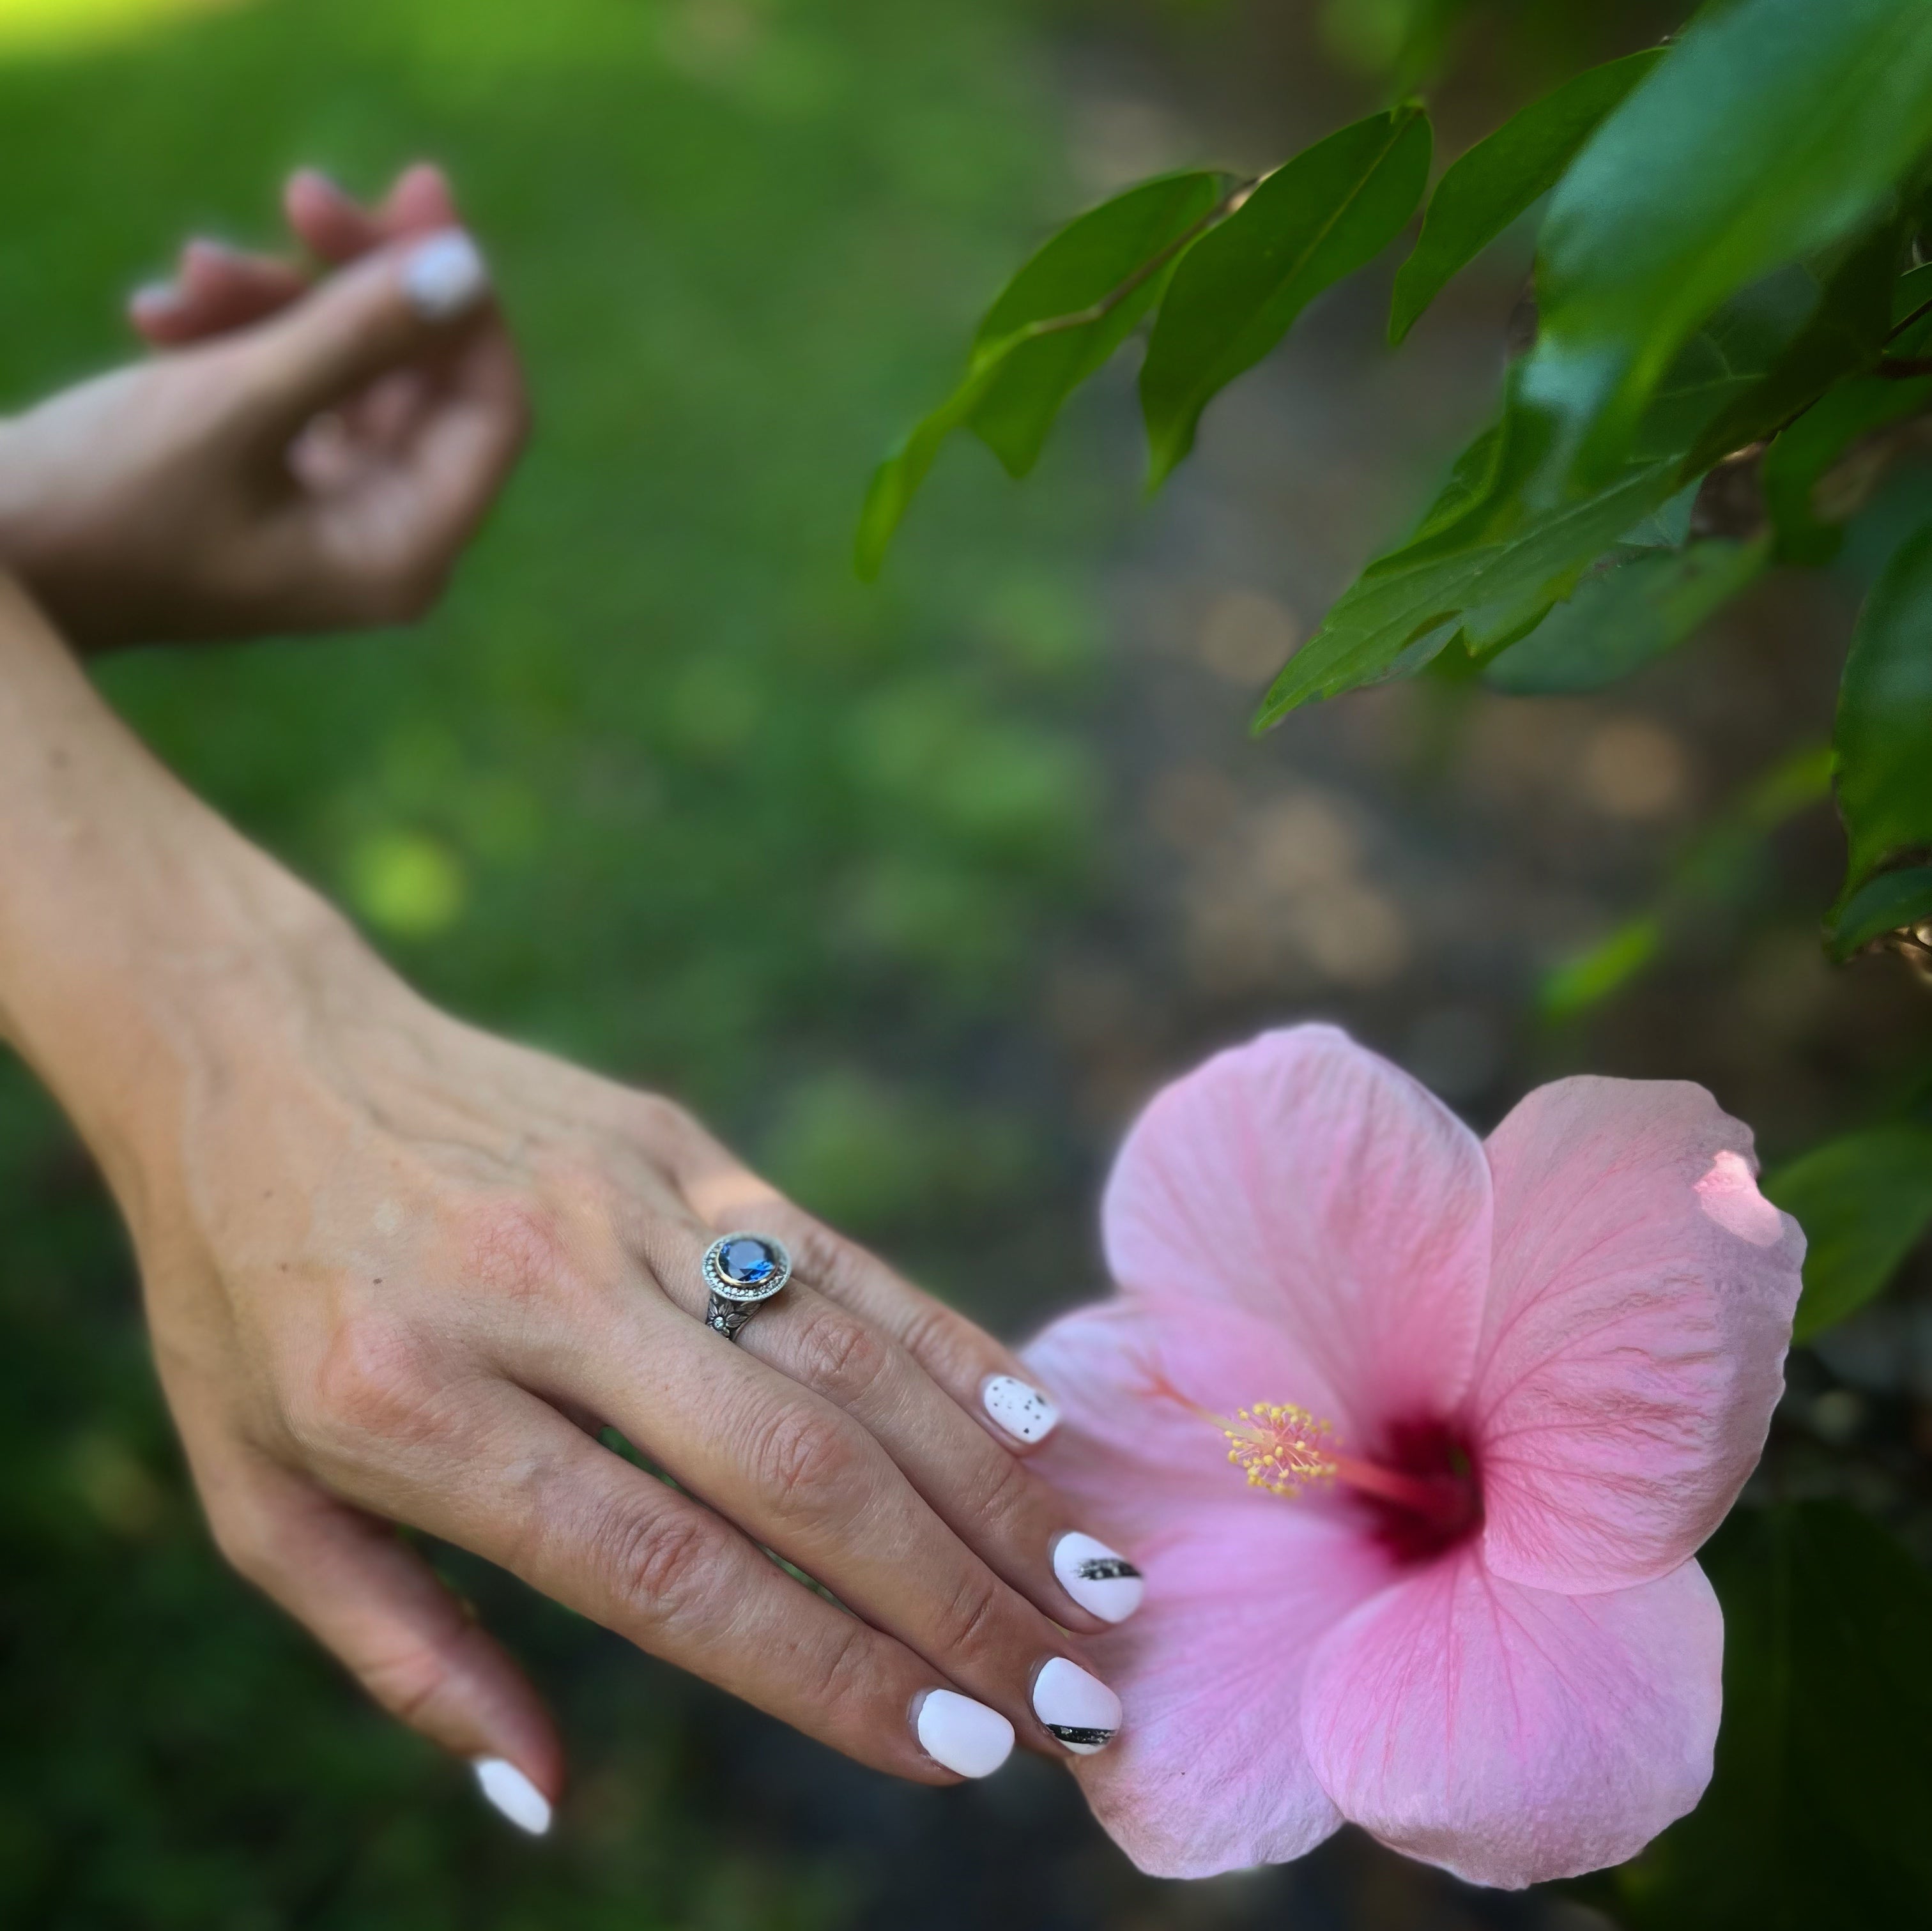 Unique and Meaningful - Model Wearing Sapphire Engagement Ring.